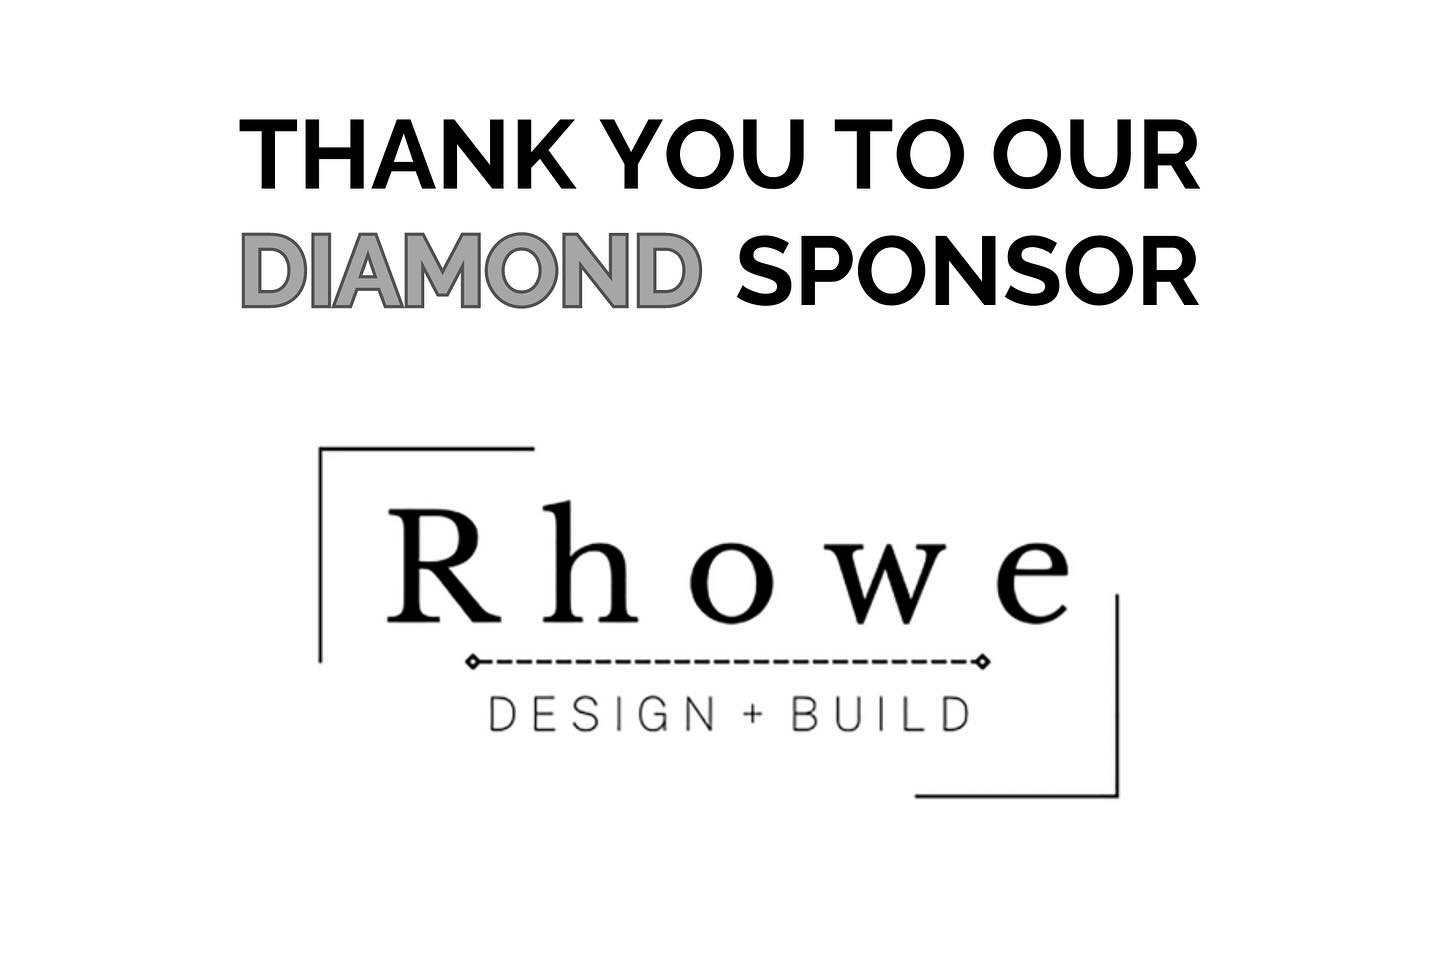 Thank you to our Diamond Sponsor, Rhowe Design and Build for supporting our first Coastal Classic! 

@rhowe_designbuild